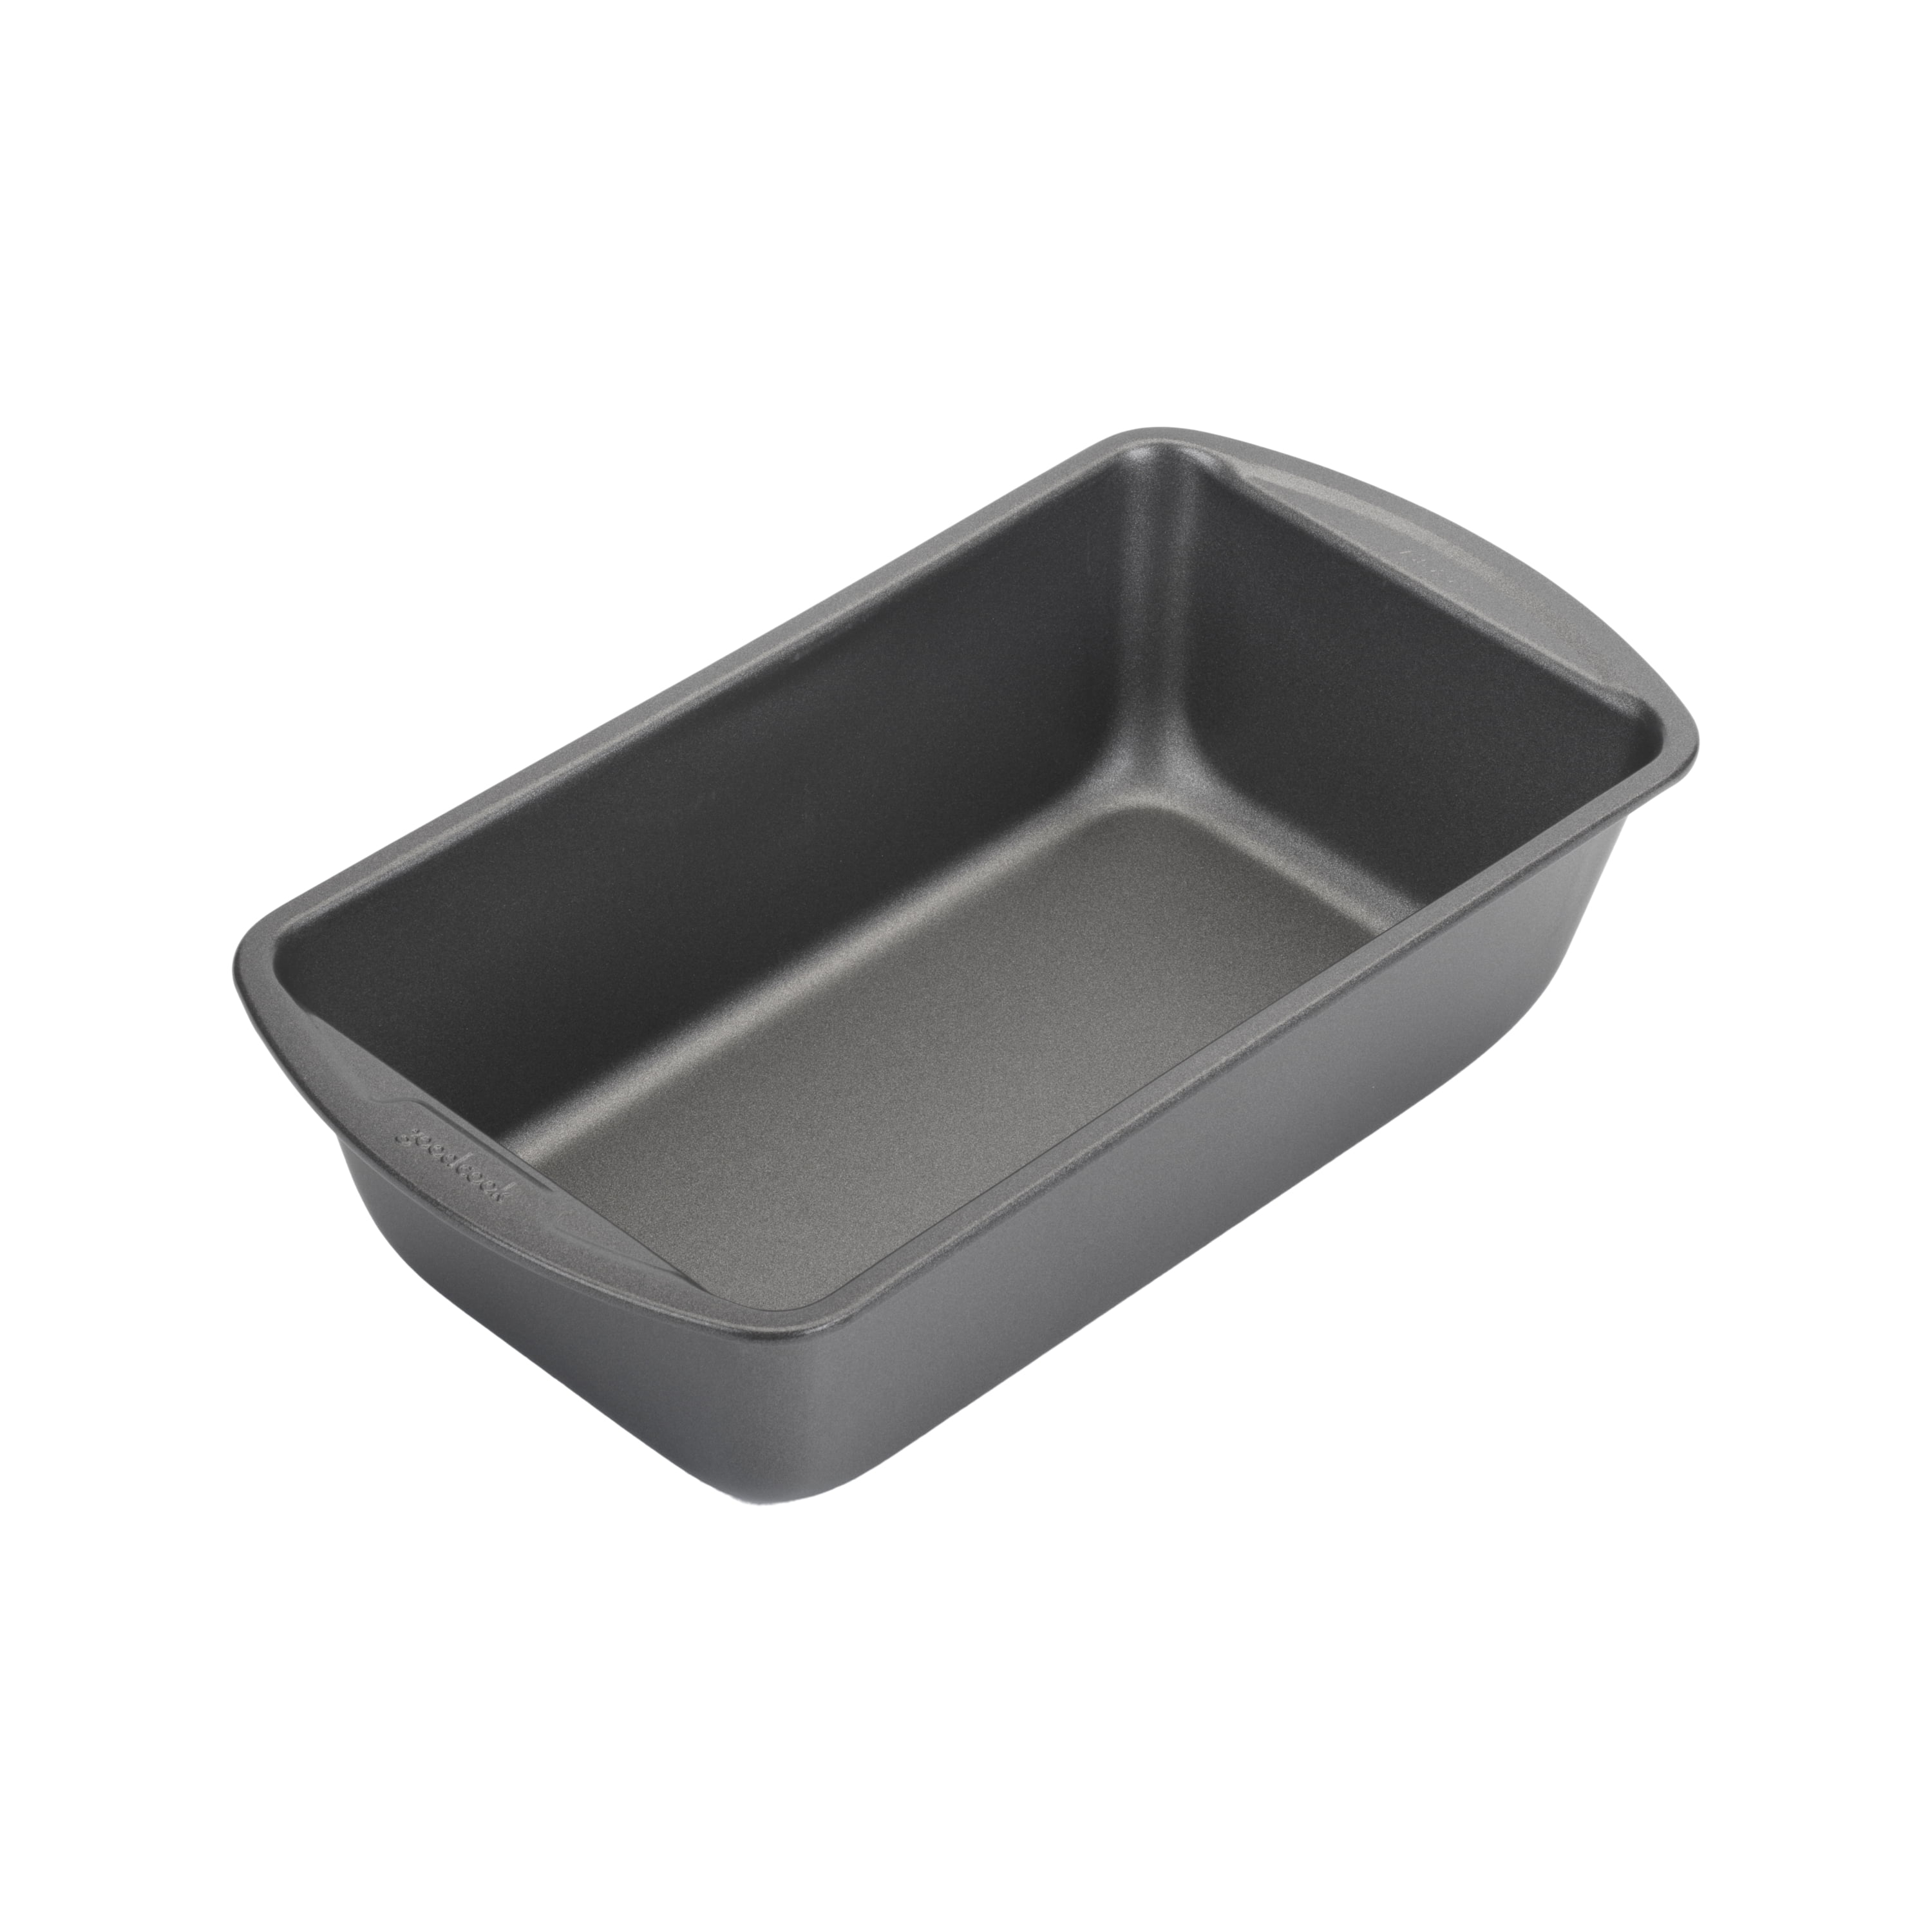 GoodCook® Nonstick Large Loaf Pan, 9 x 5 in - City Market